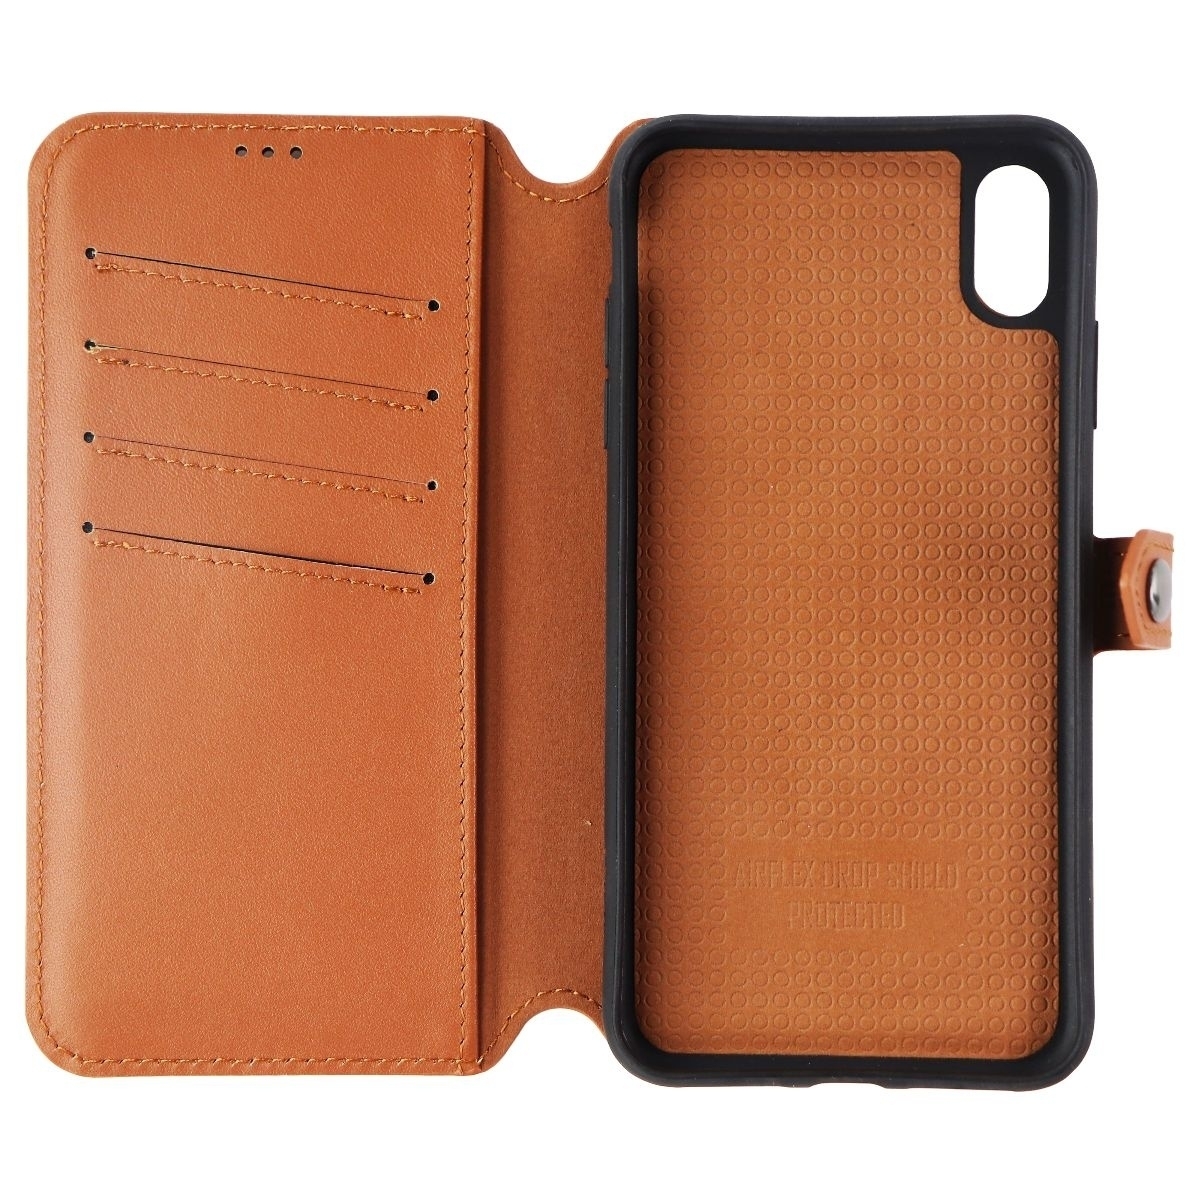 Ercko 2-in1 Magnet Wallet And Case For Apple IPhone Xs Max - Brown/Black